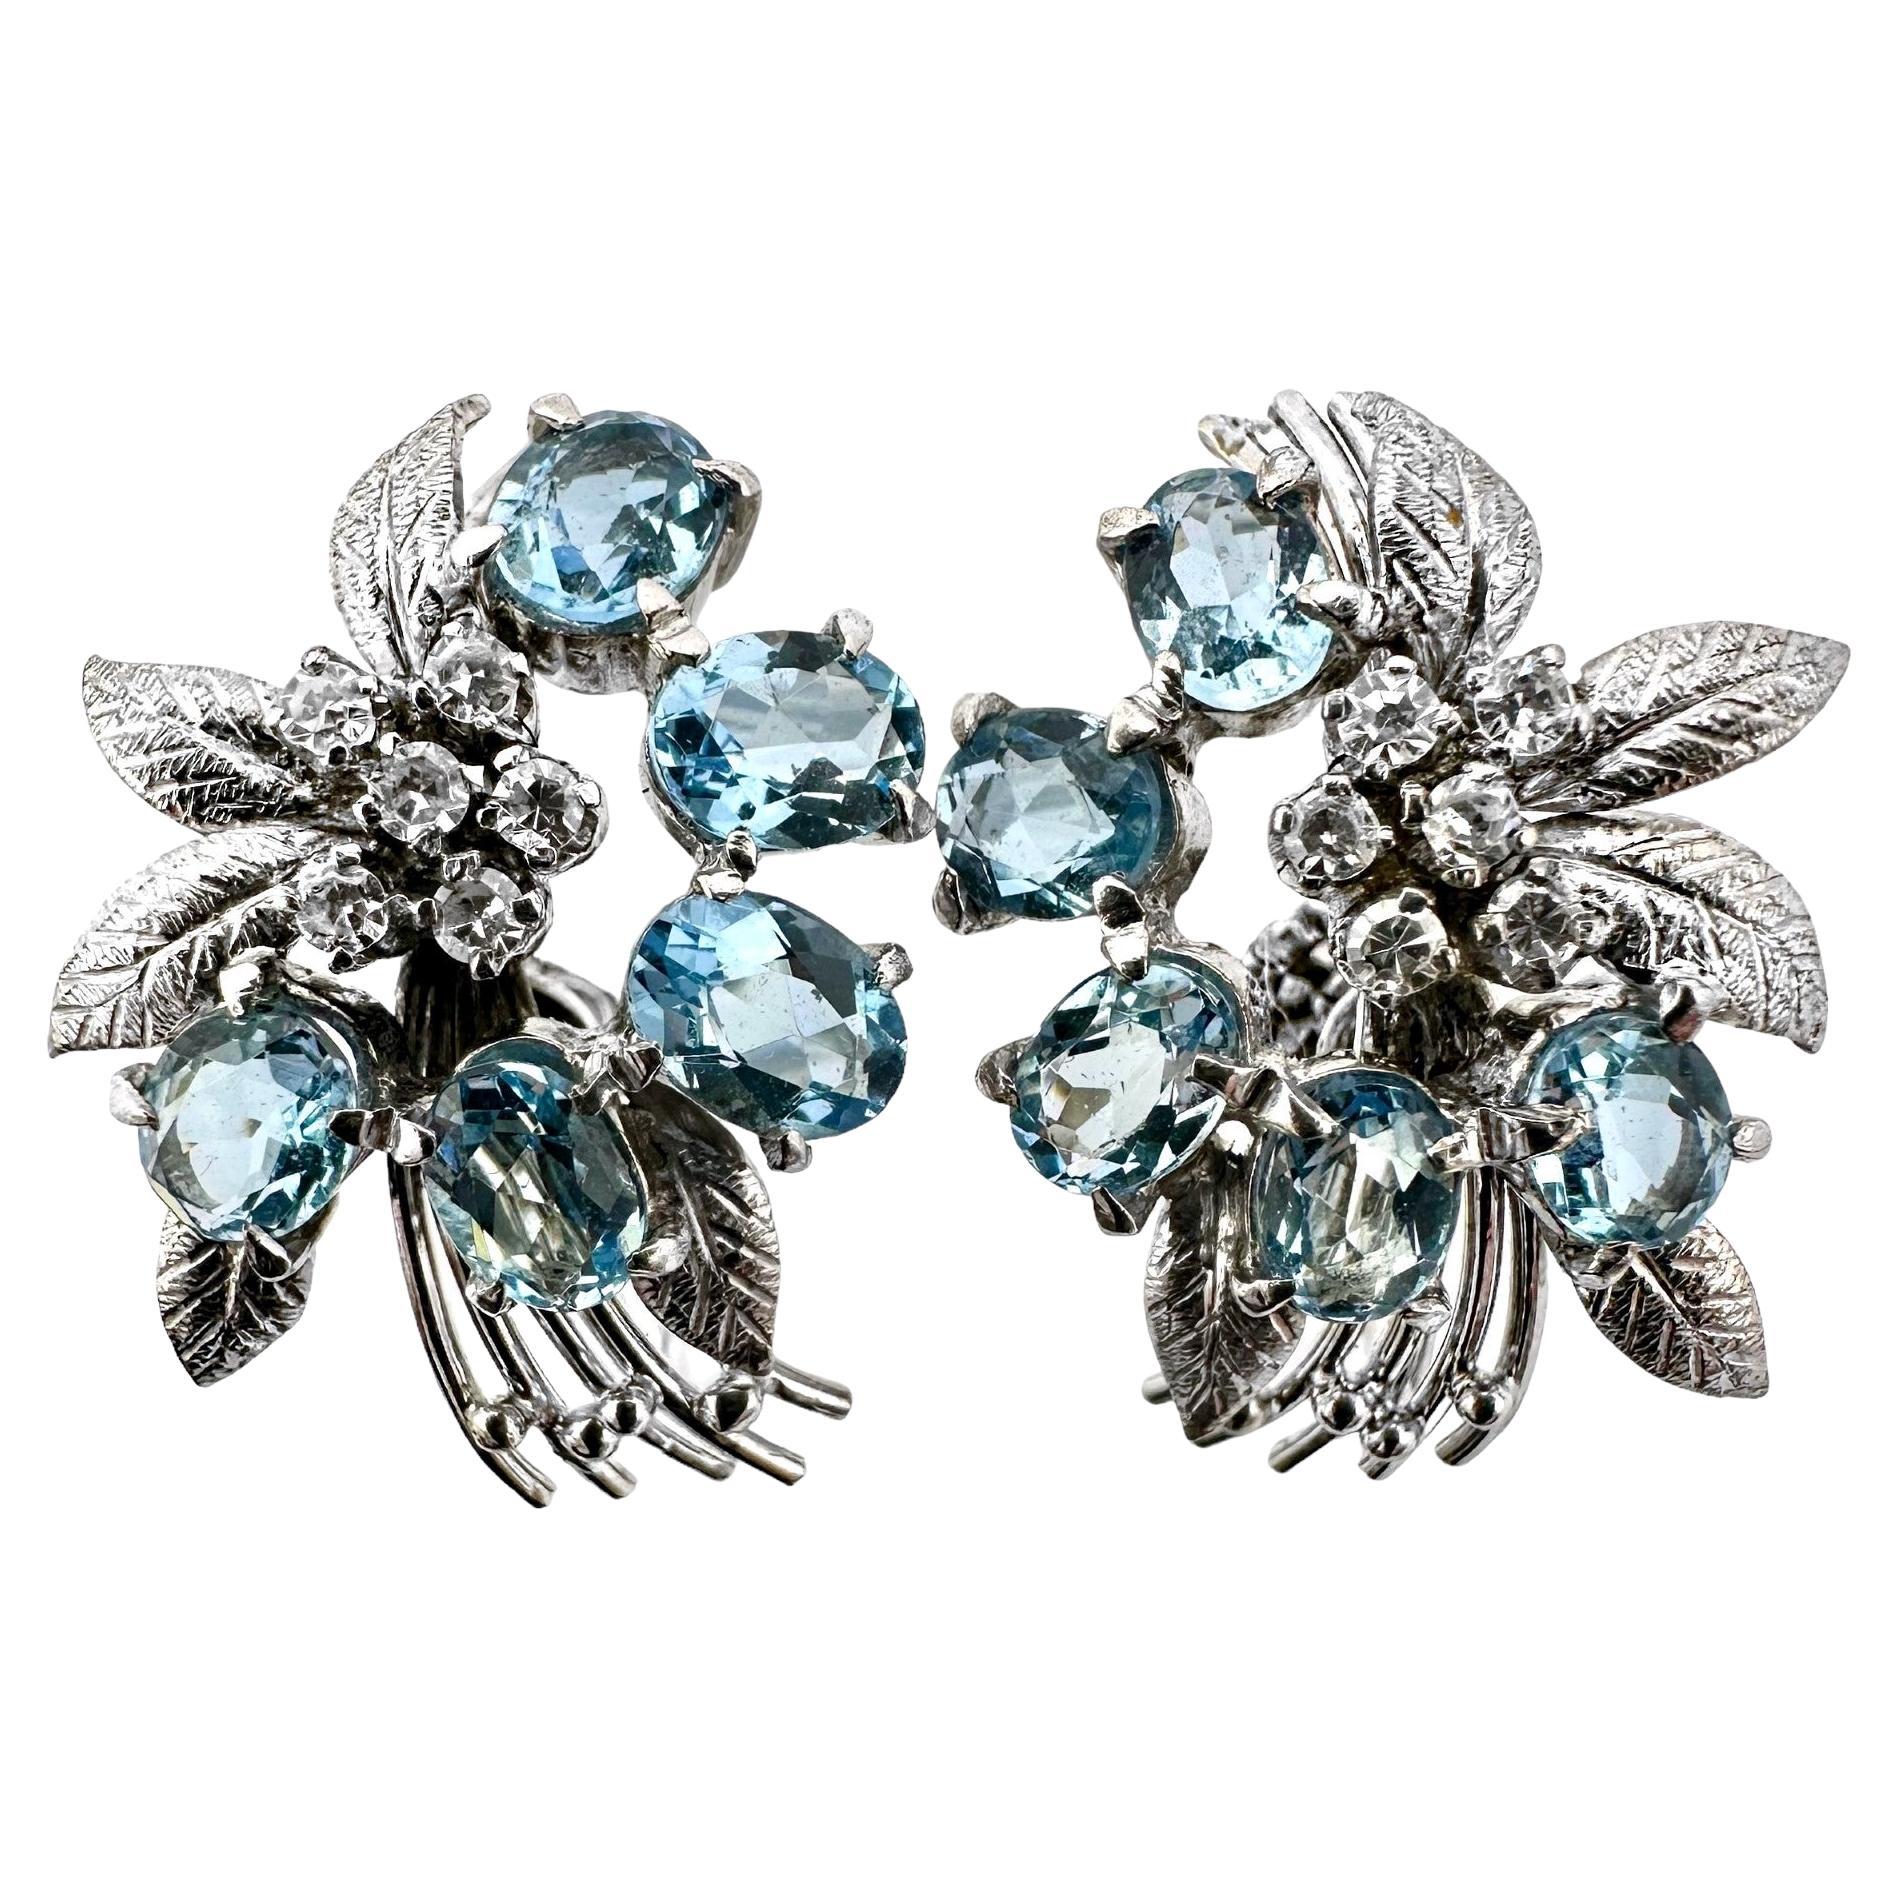 This absolutely charming pair of Mid-20th Century 18k white gold, Aquamarine and diamond floral bouquet clip on earrings are a true visual delight. Set with a total of ten oval aquamarine stones and twelve single cut diamonds, they have a wonderful